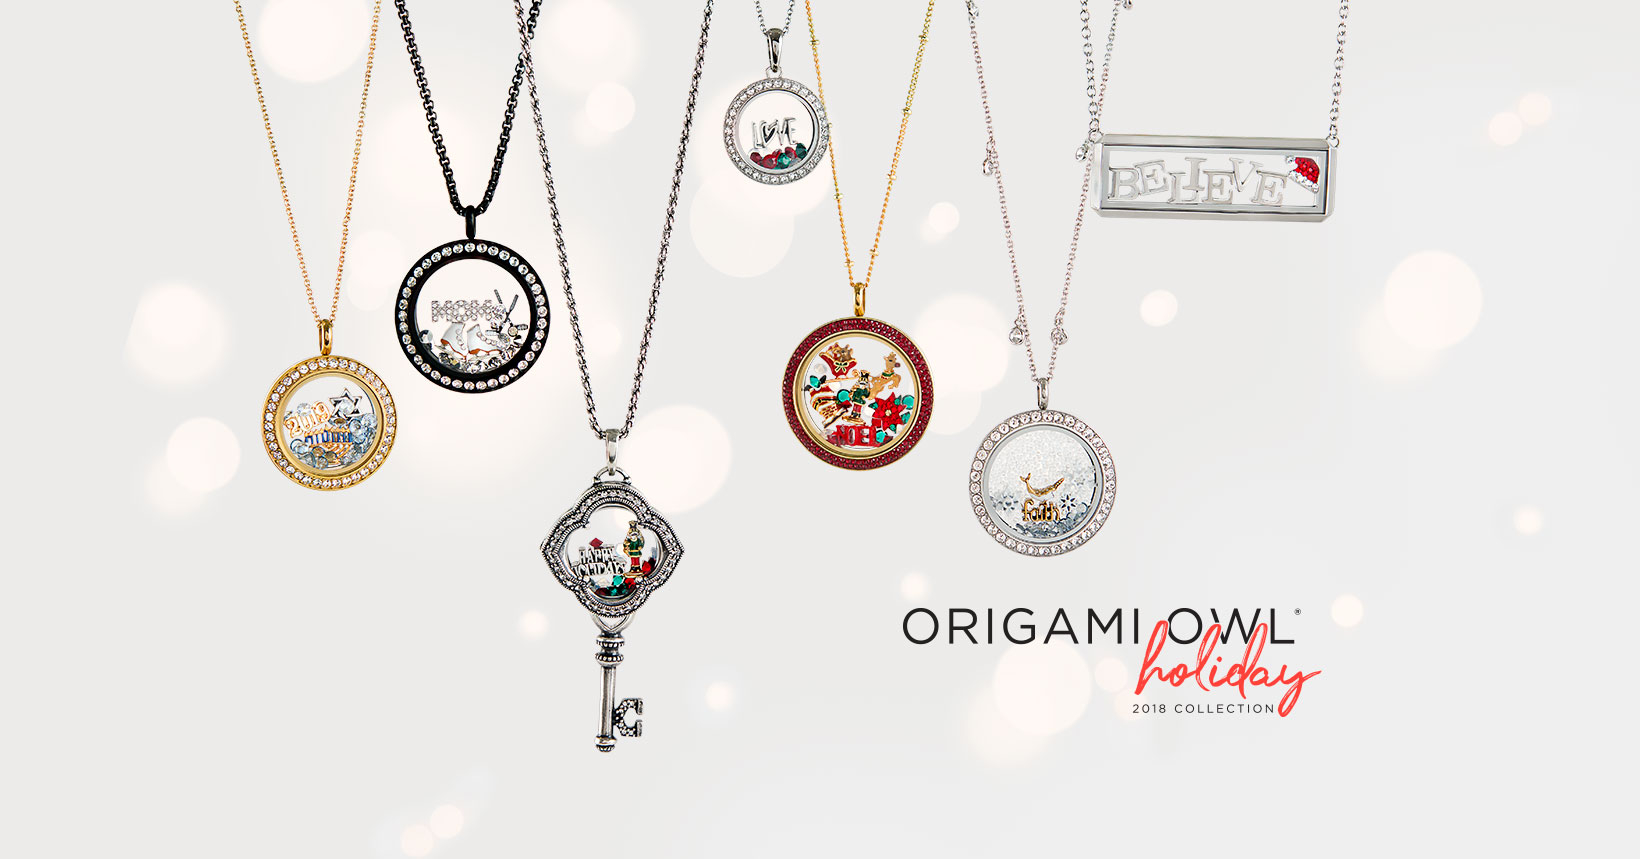 Origami Owl Designer Login The Holiday 2018 Collection Is Here Origamiowlnews